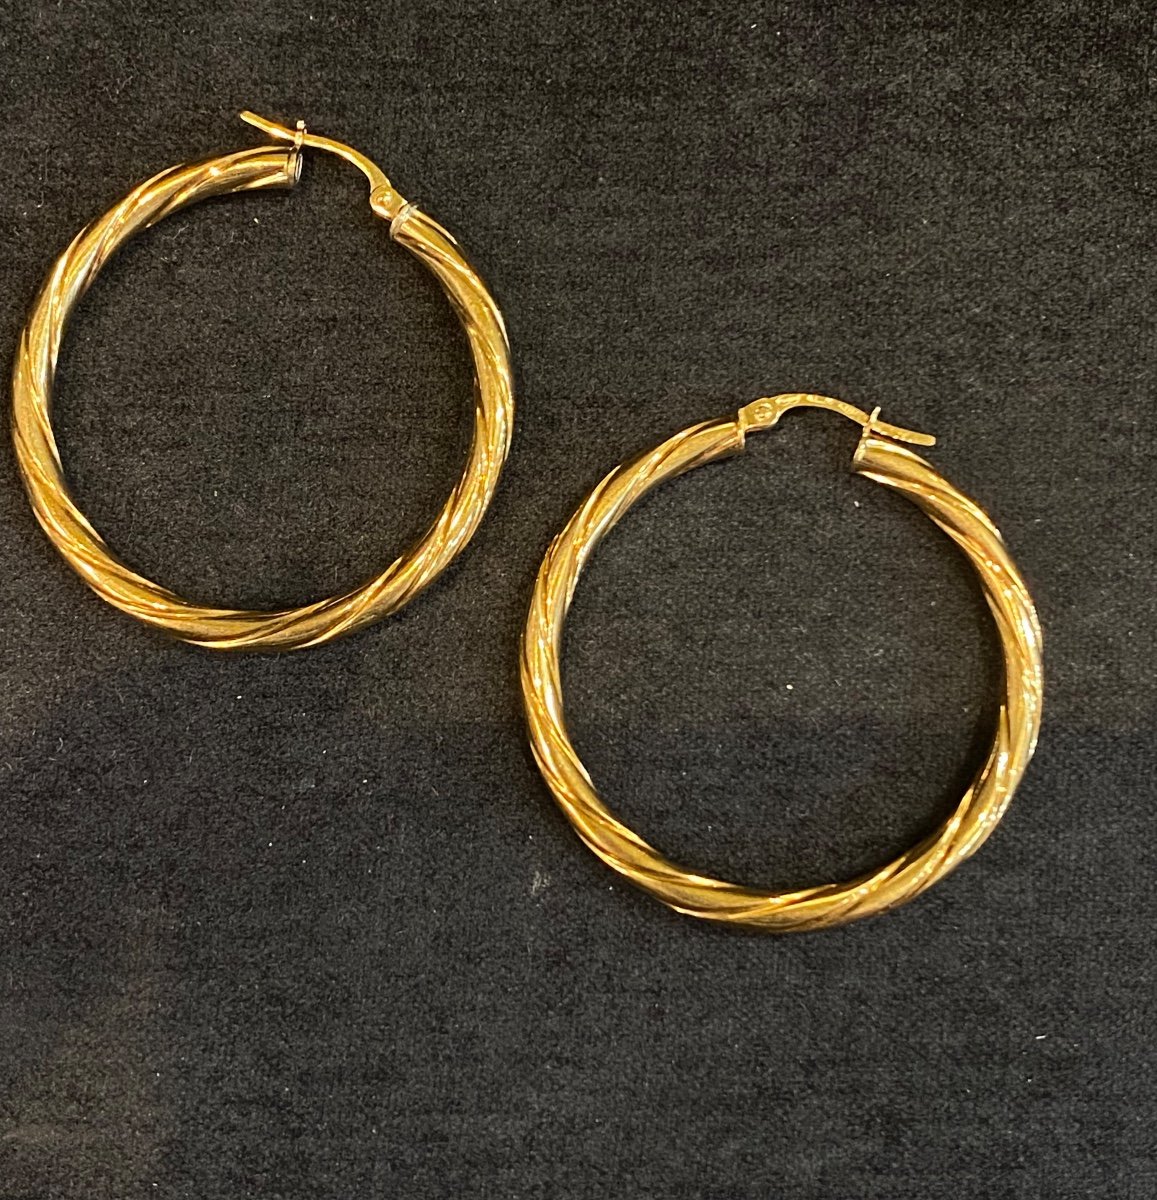 A Pair Of Creole Earrings